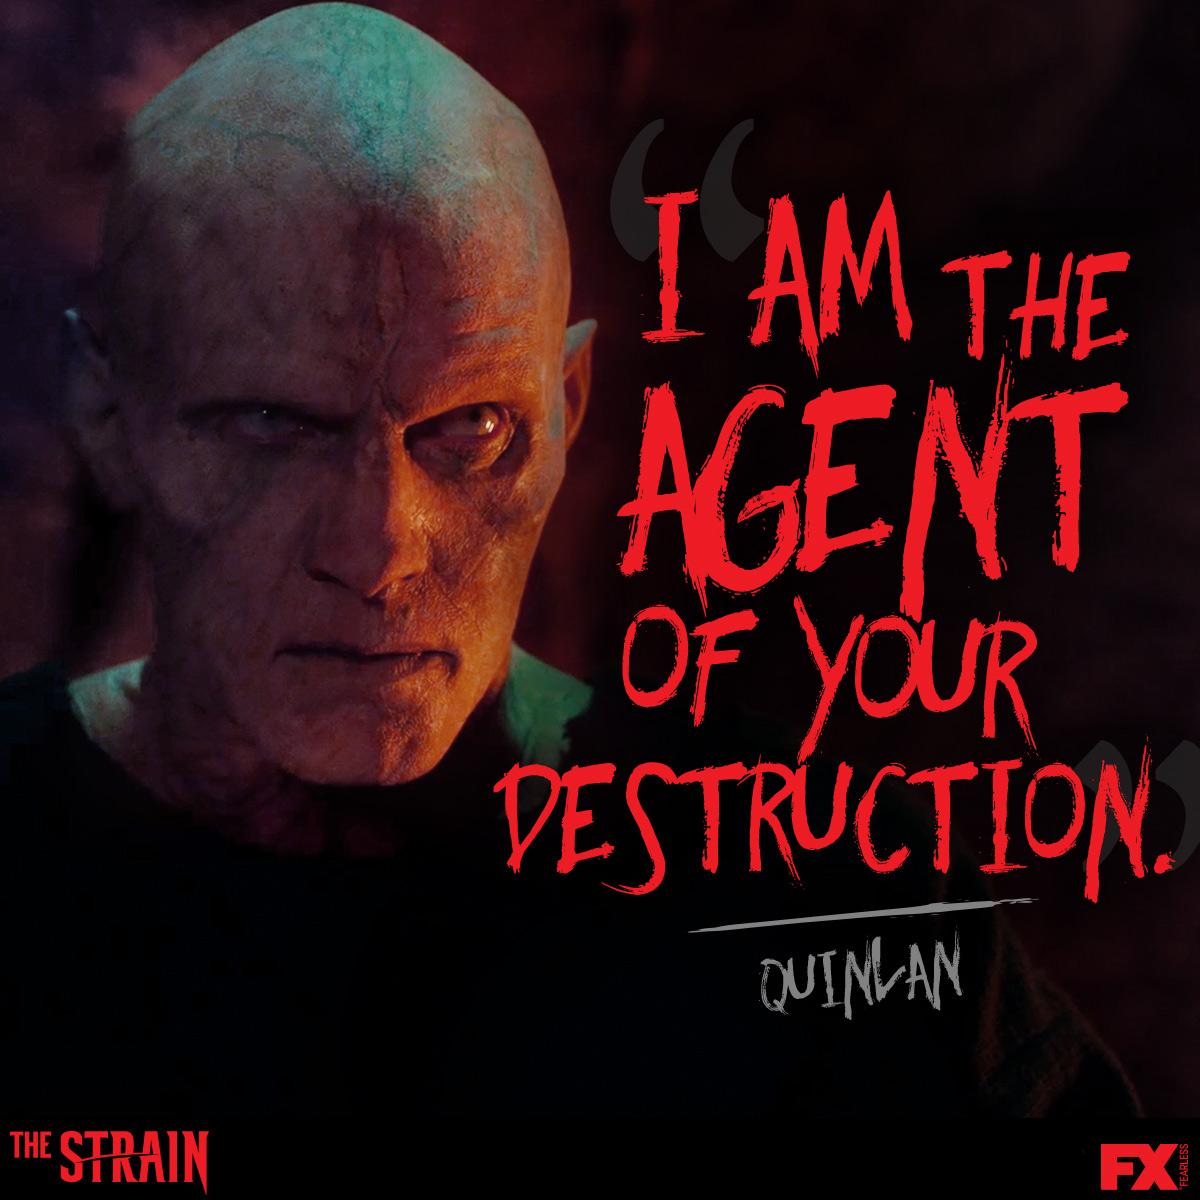 Amazing The Strain Pictures & Backgrounds